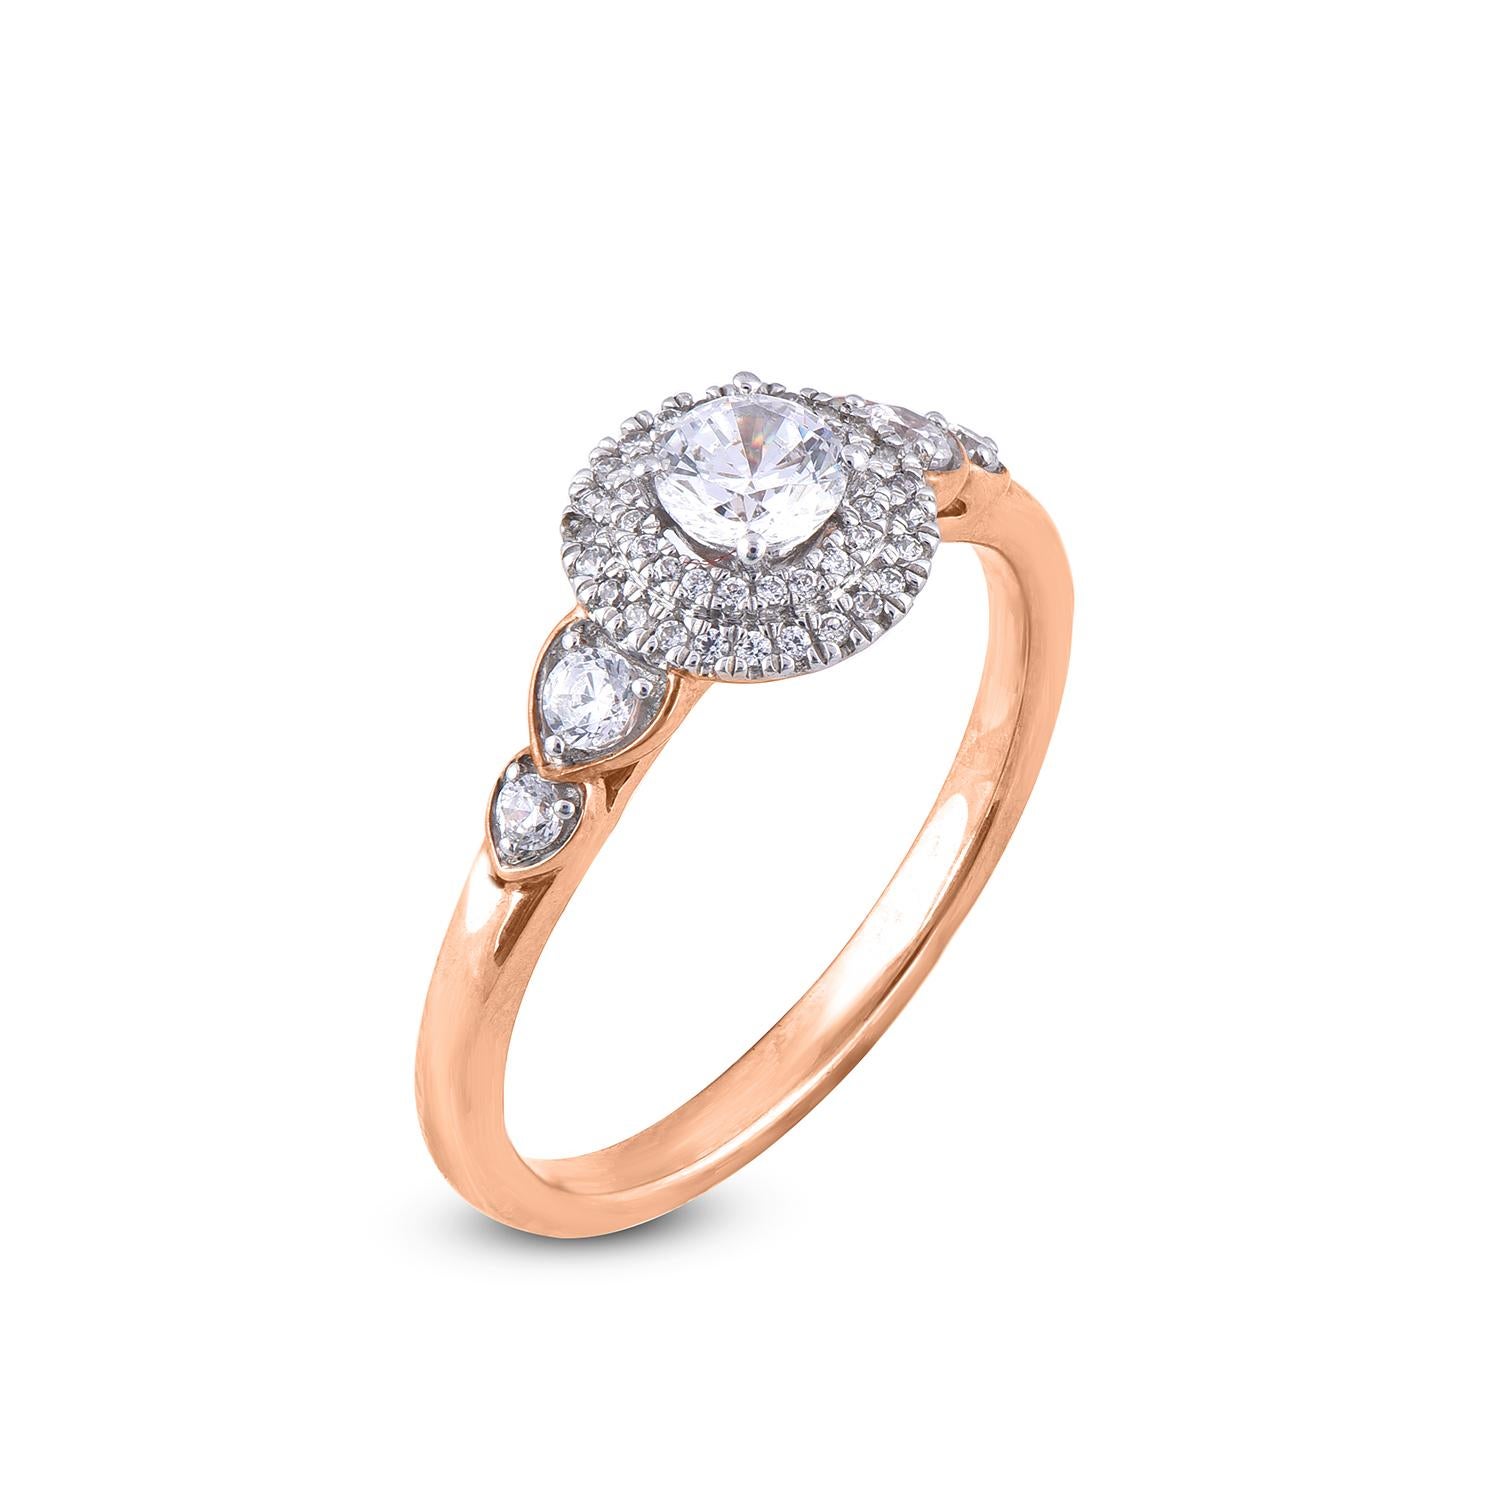 This diamond entangle engagement ring is sure to be admired for this inherent classic beauty and elegance within its design. it features 0.25 ct of round centre stone and 0.25 ct of lined diamonds on frame and shoulders. Expertly Crafted of